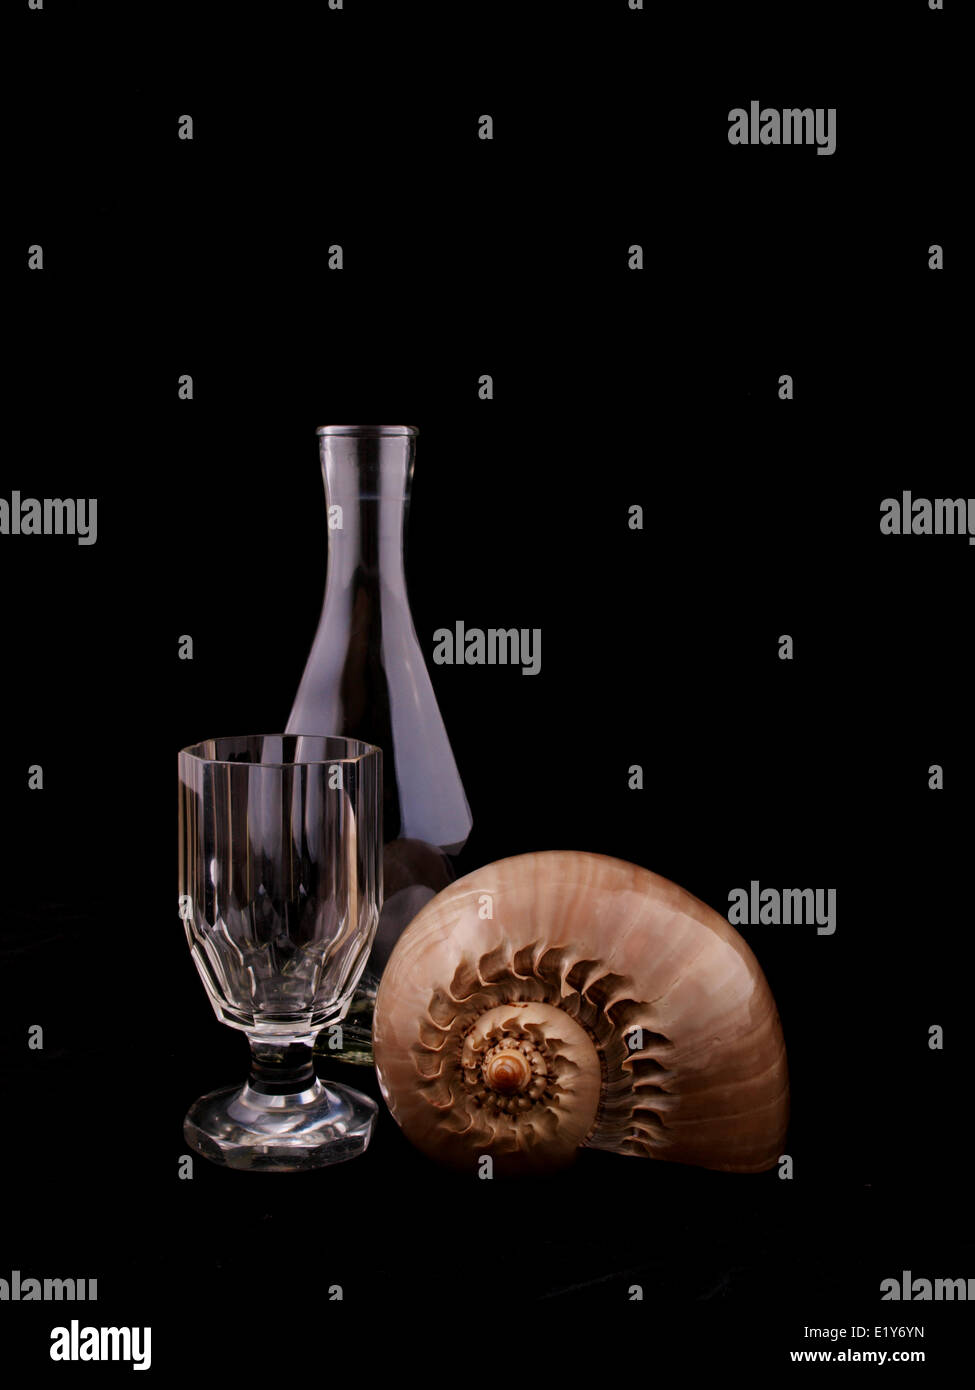 decanters, glasses, mussels in black Stock Photo